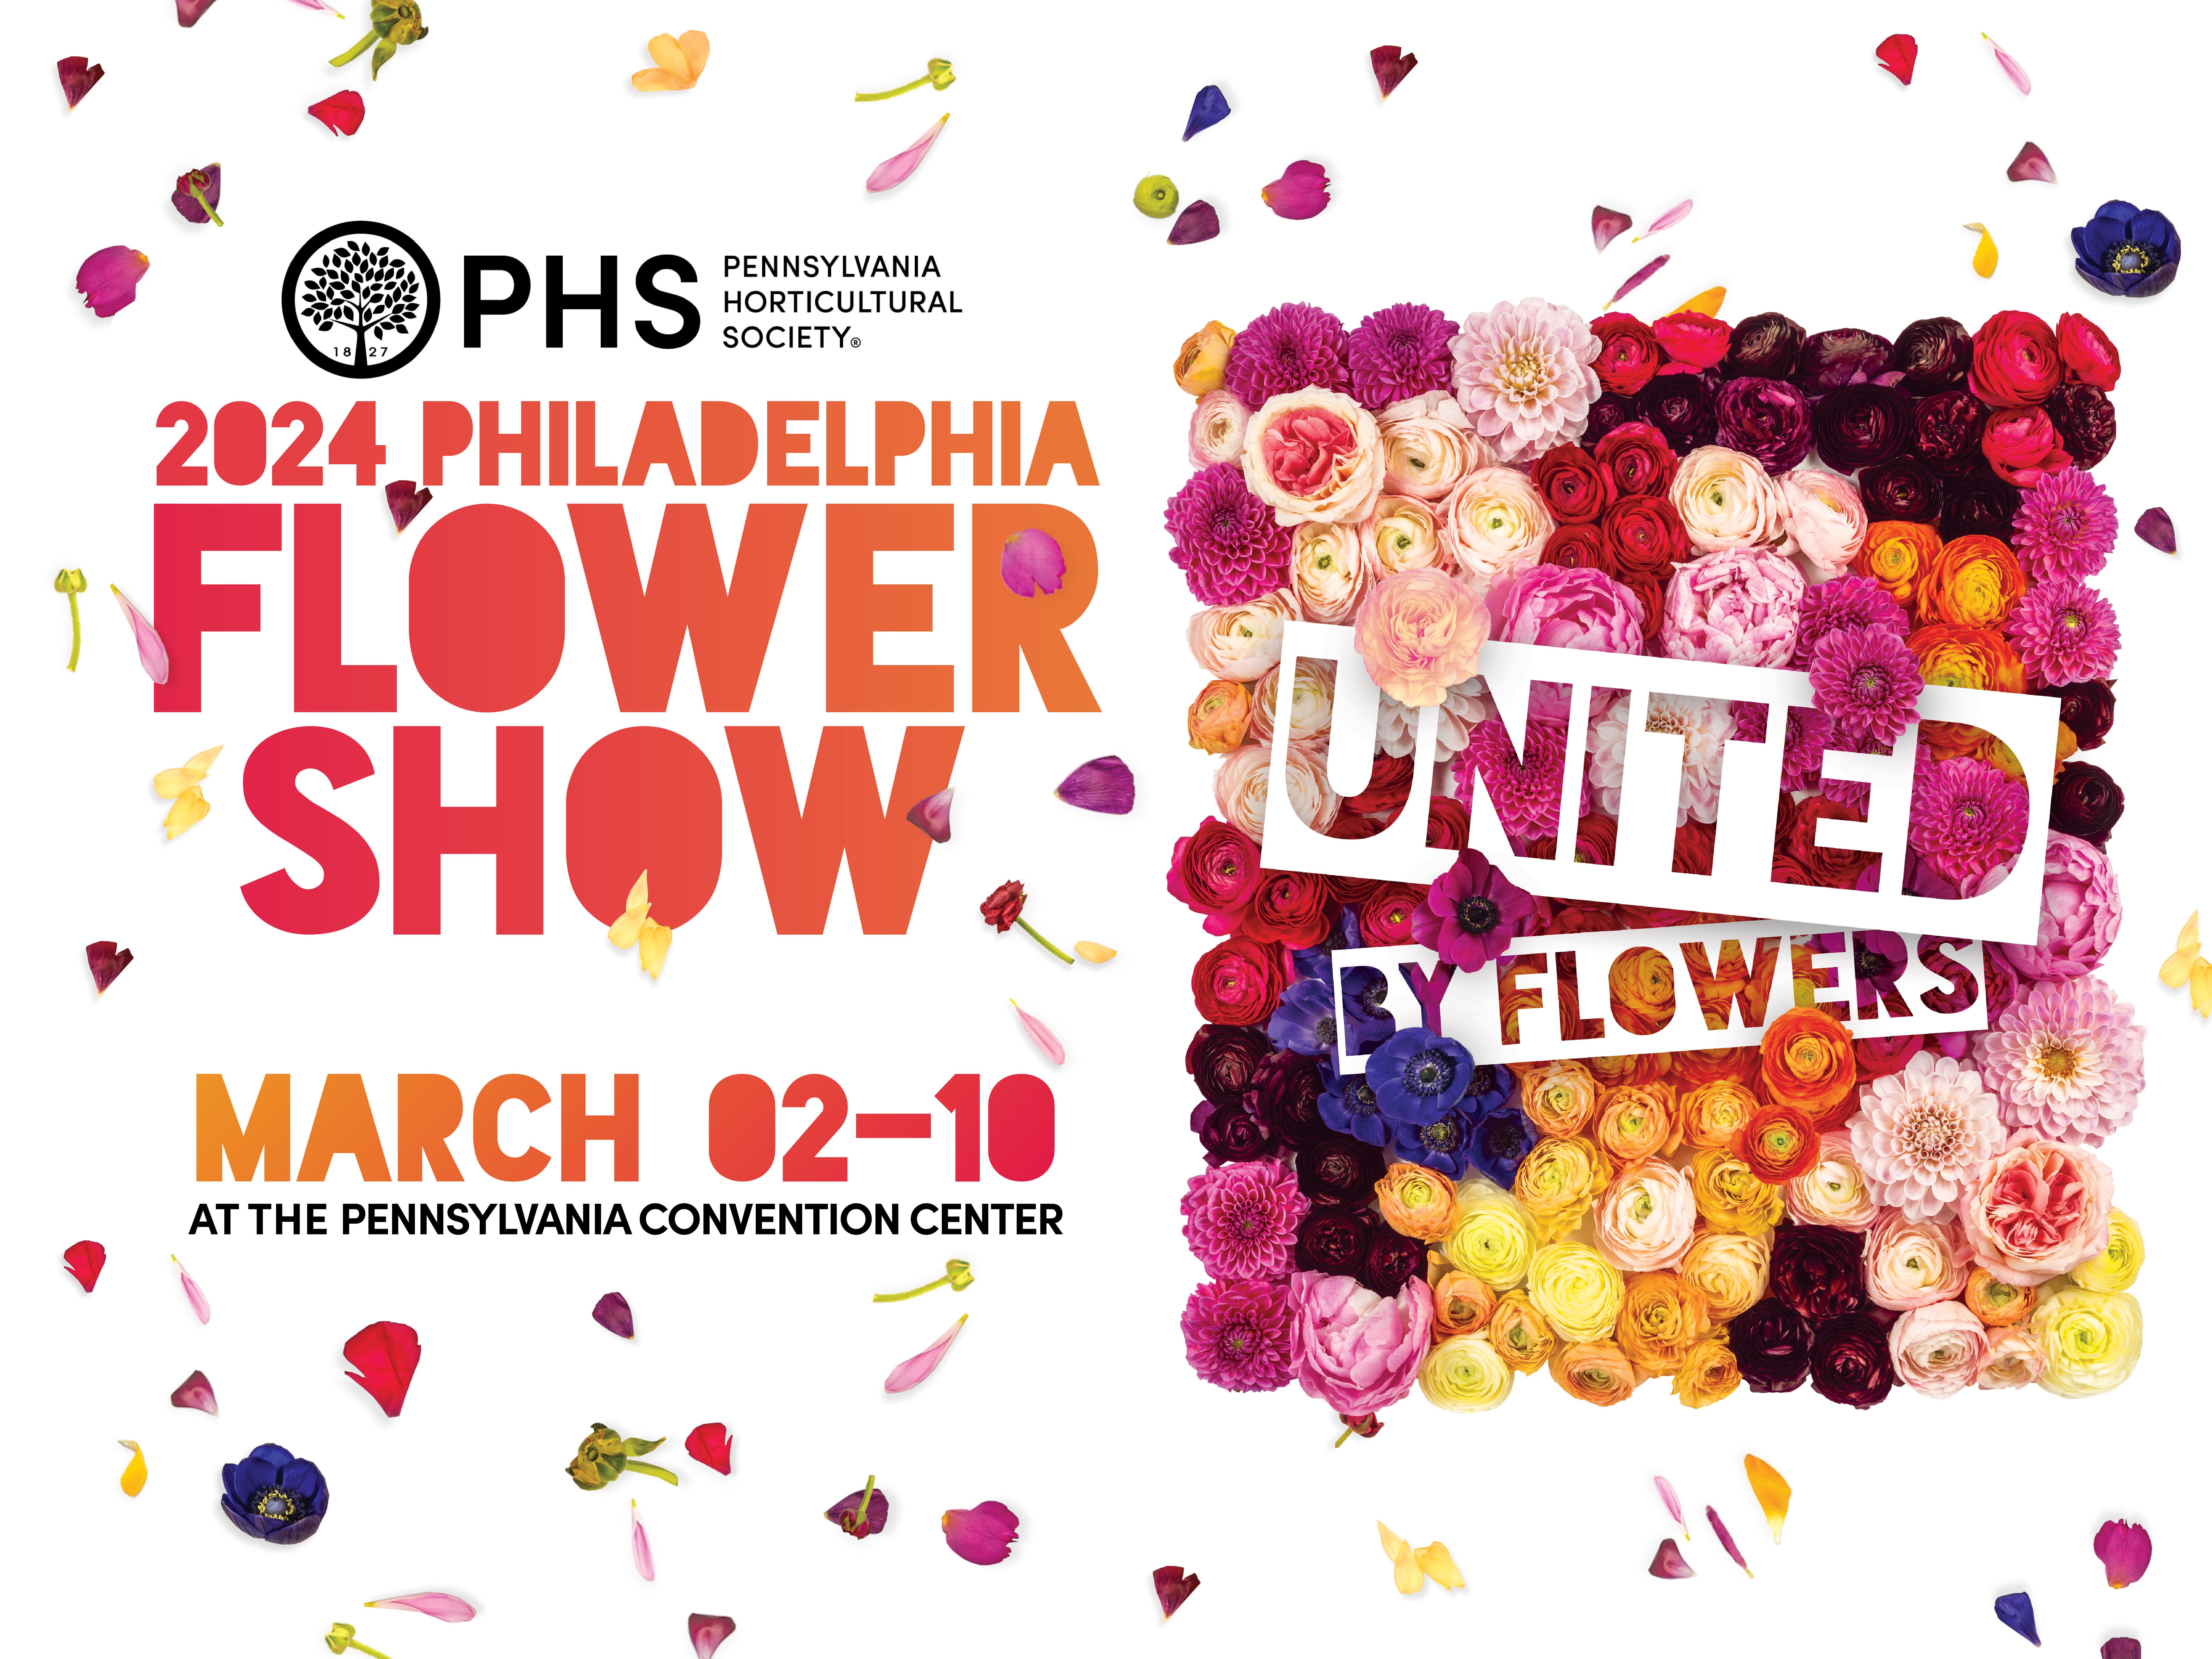 Pennsylvania Horticultural Society 2024 Philadelphia Flower Show Promotion United by Flowers Promotion March 02-10